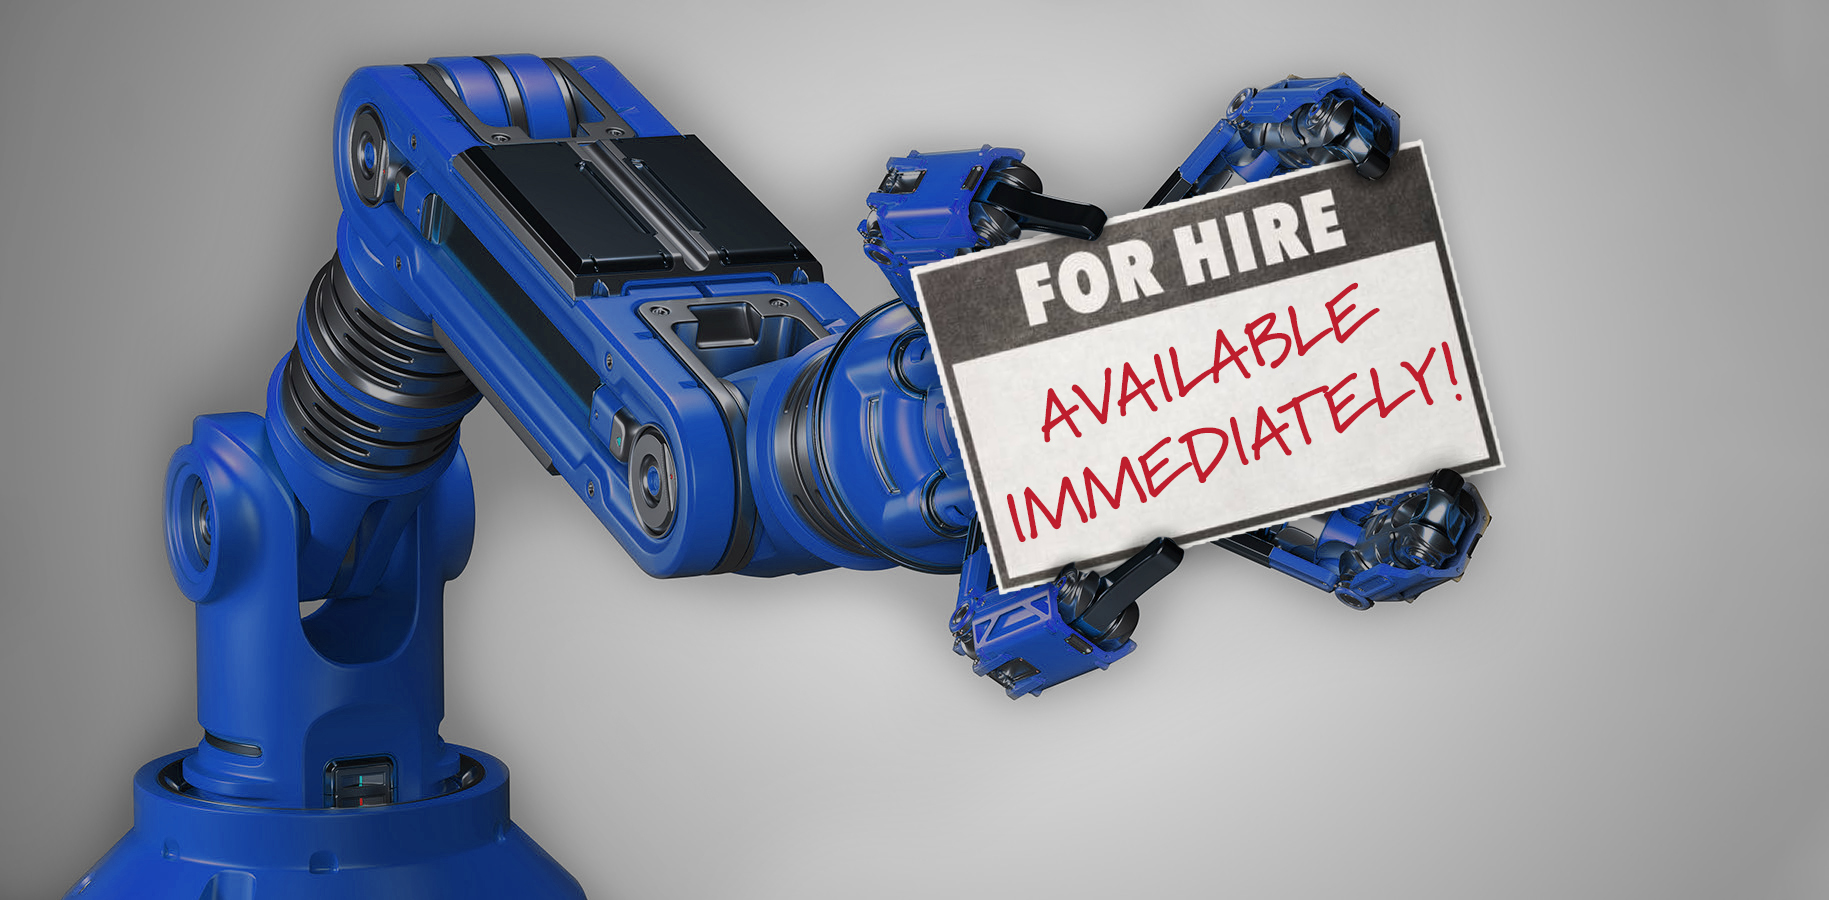 New equipment "for hire"